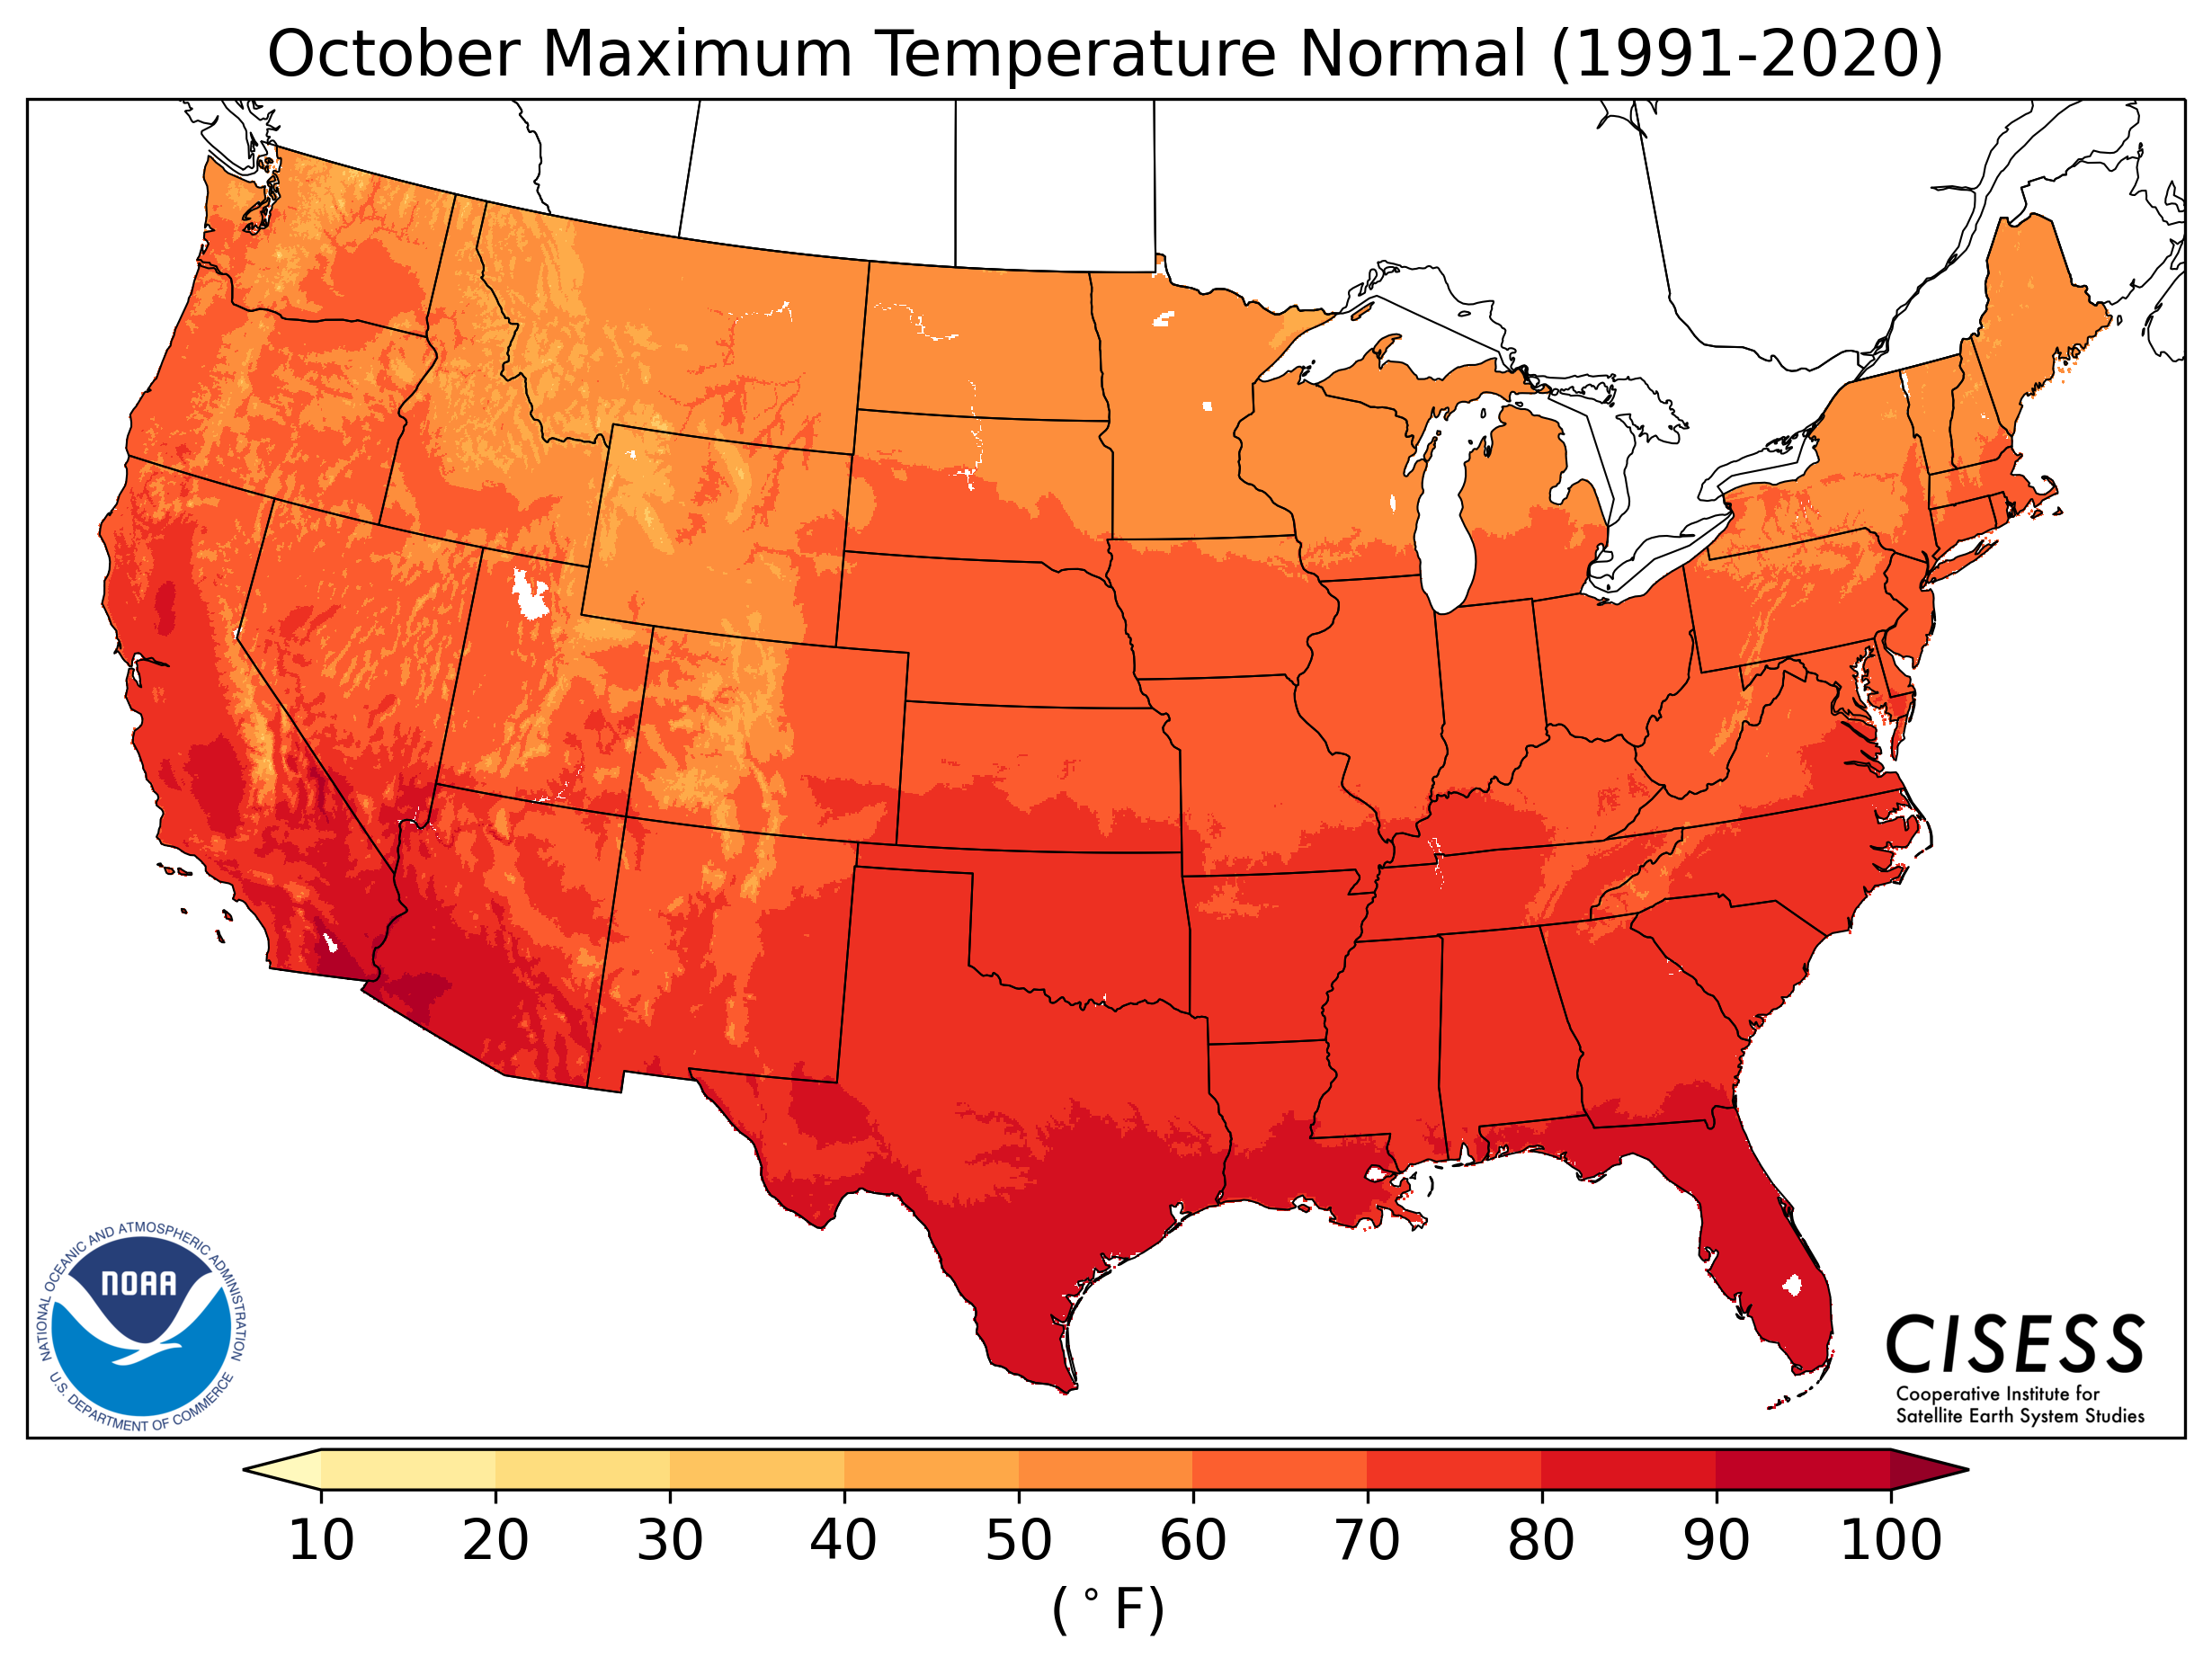 Map of the contiguous United States displaying October maximum temperature normals from 1991 to 2020 as a range from 10 degrees Fahrenheit to 100 degrees Fahrenheit in colored shades from yellow to dark red.